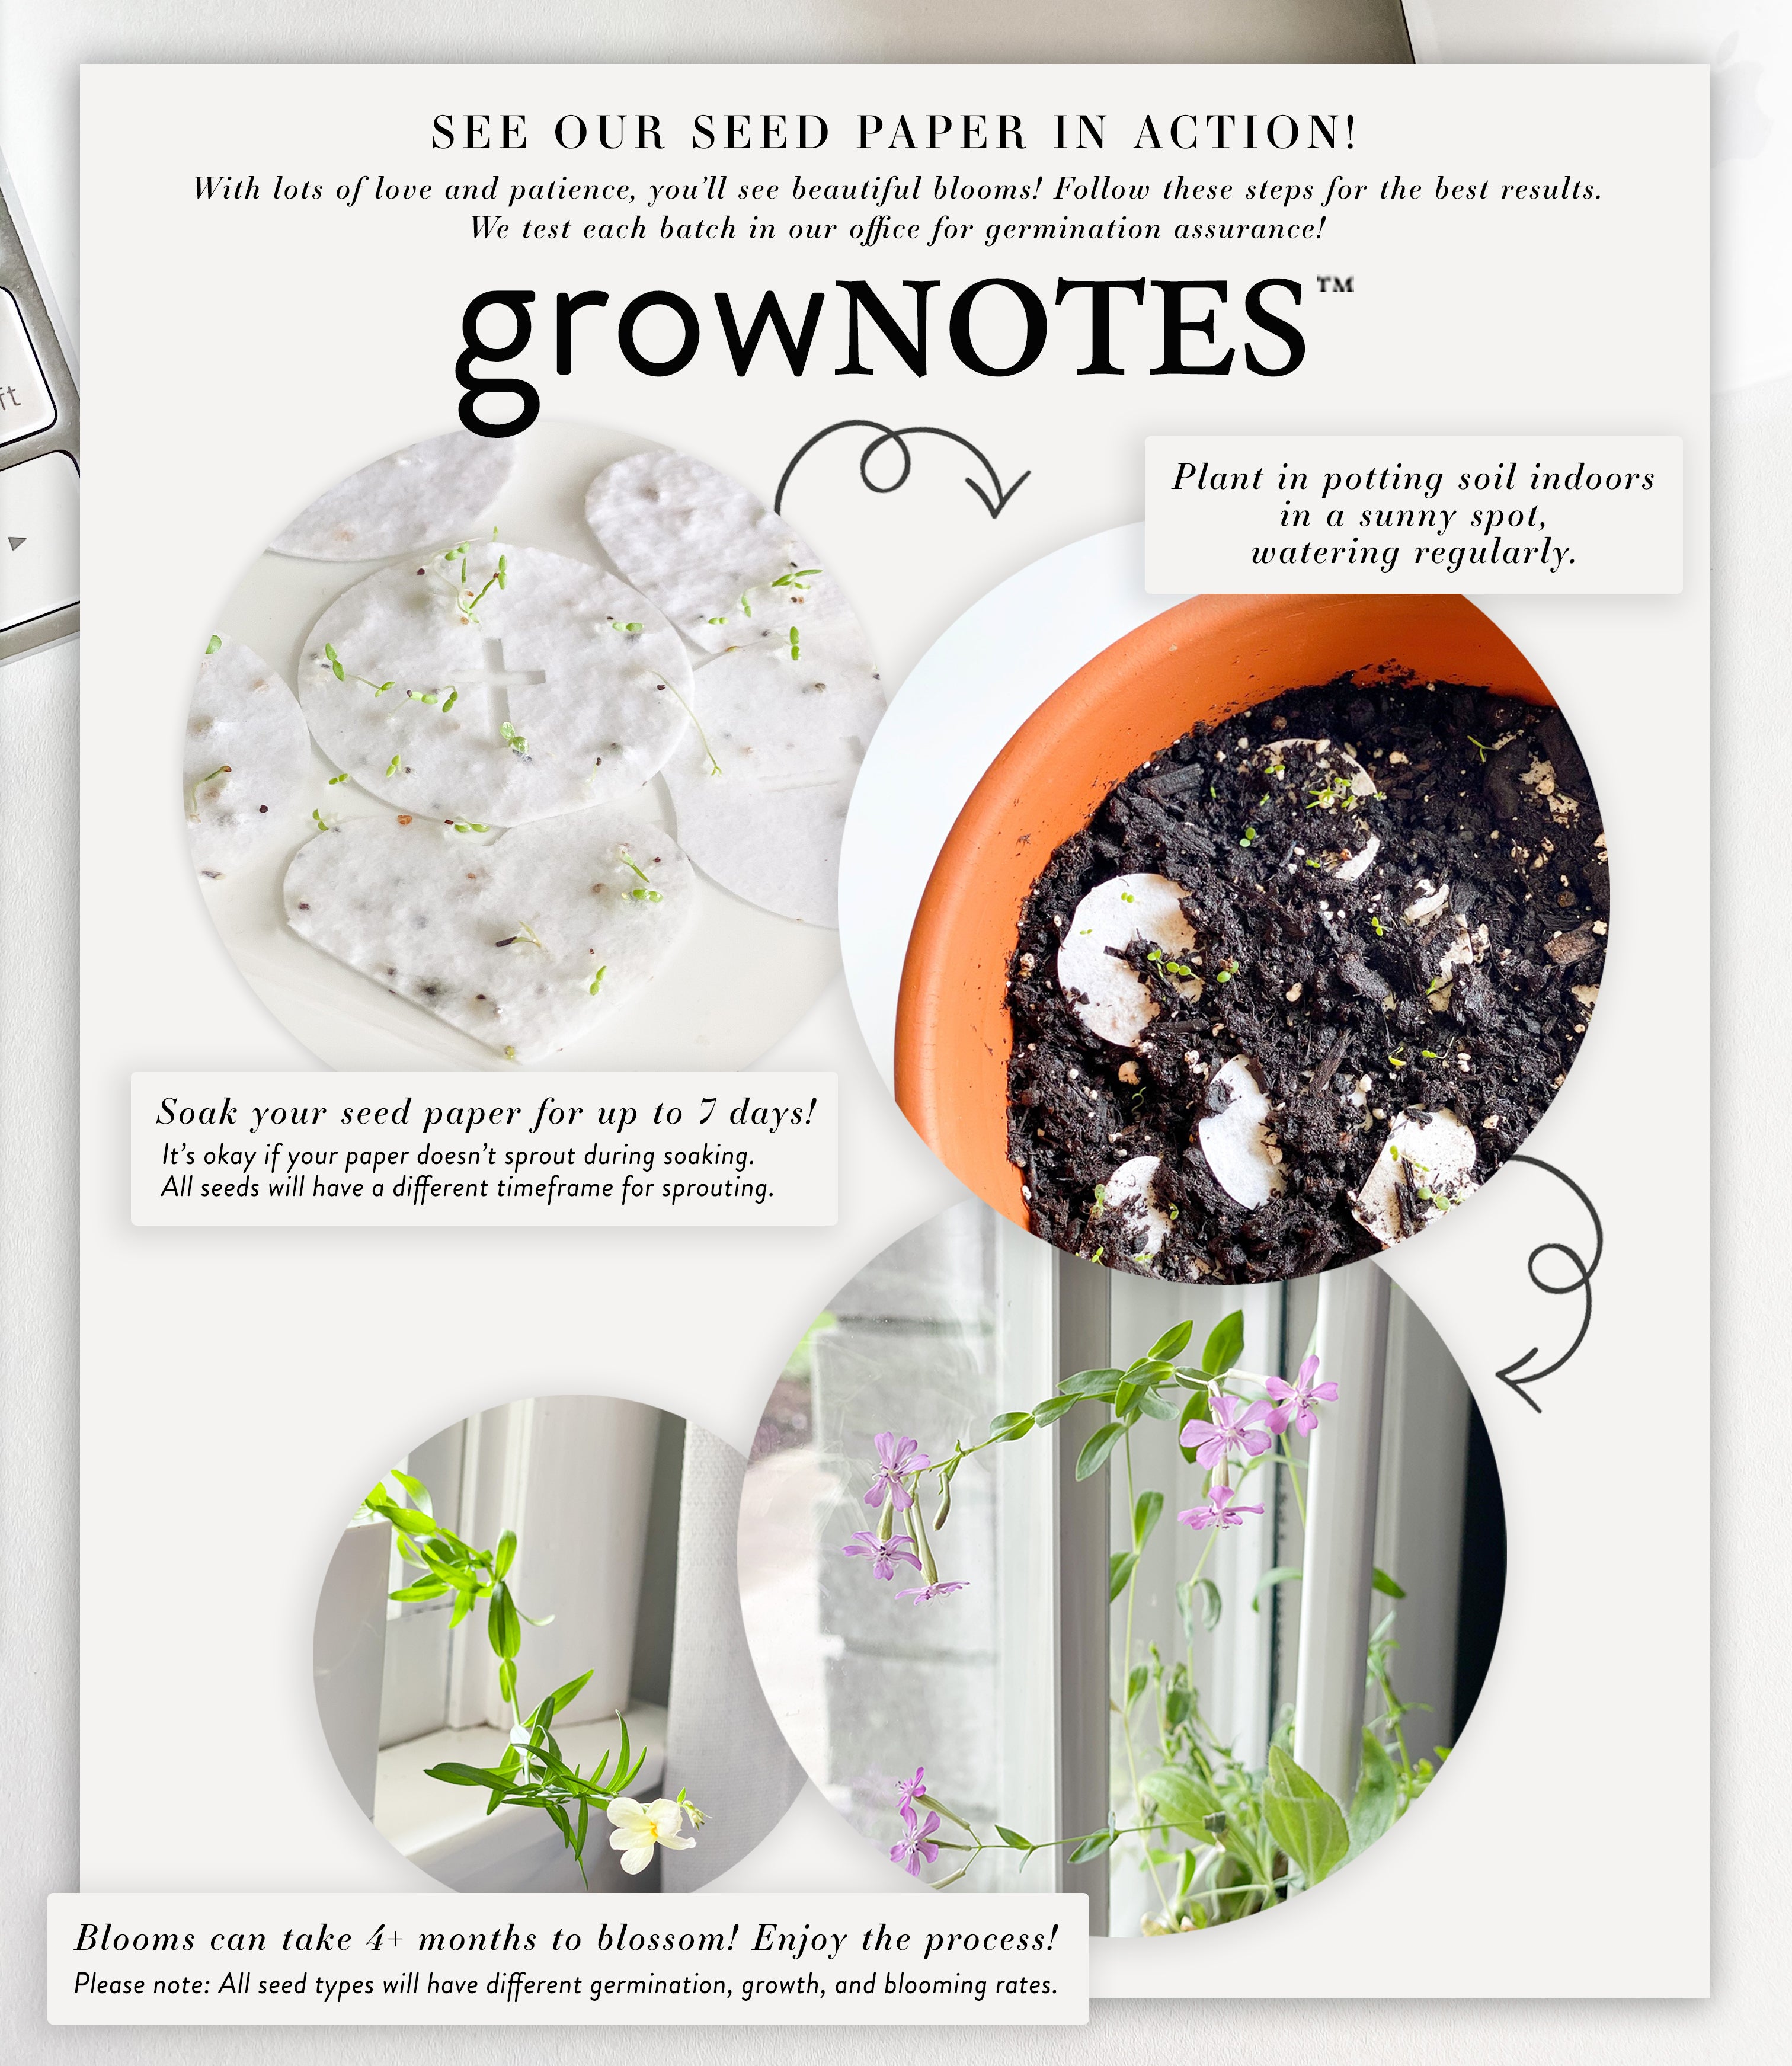 growNOTES™ Plantable Custom A2 Promotional Cards